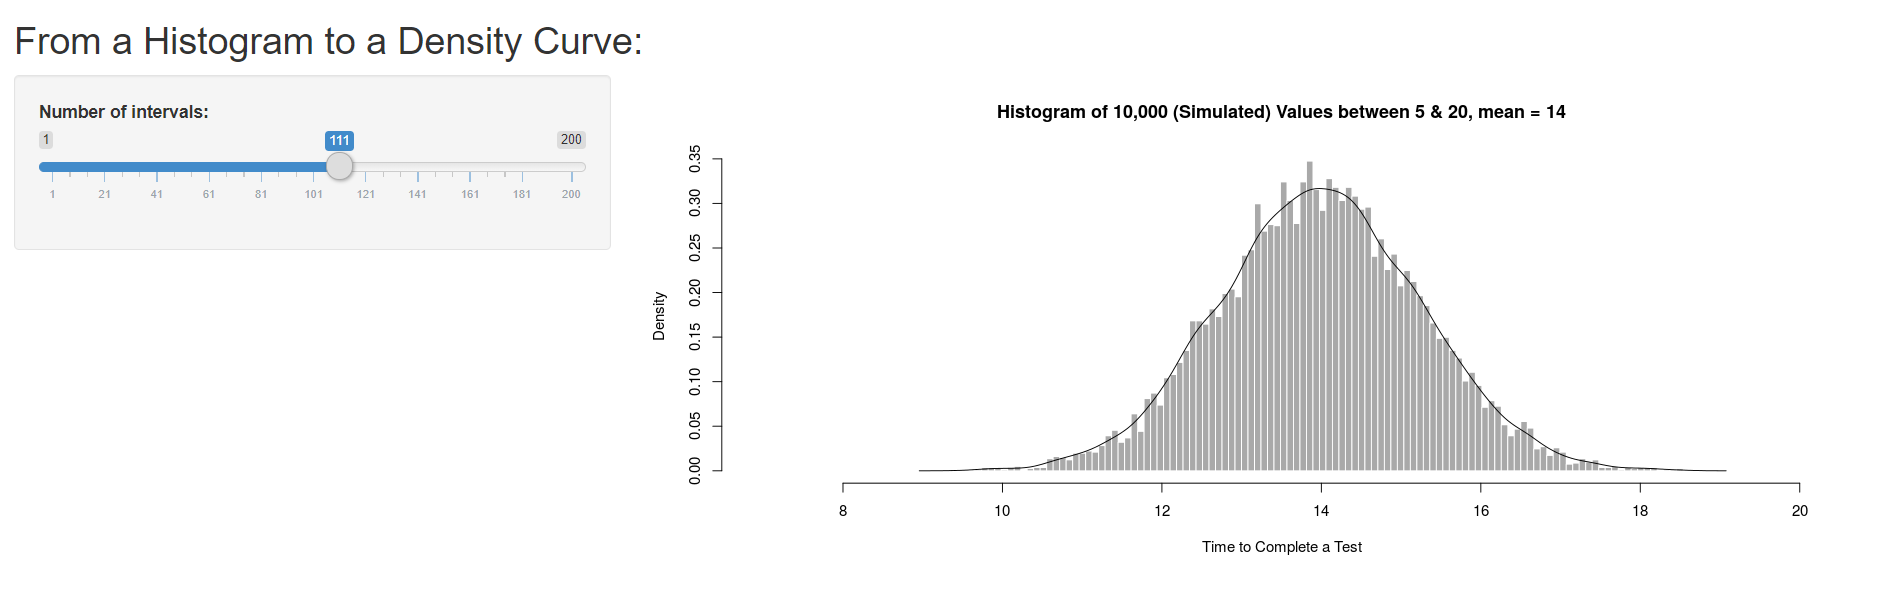 From a Histogram to a Density Curve